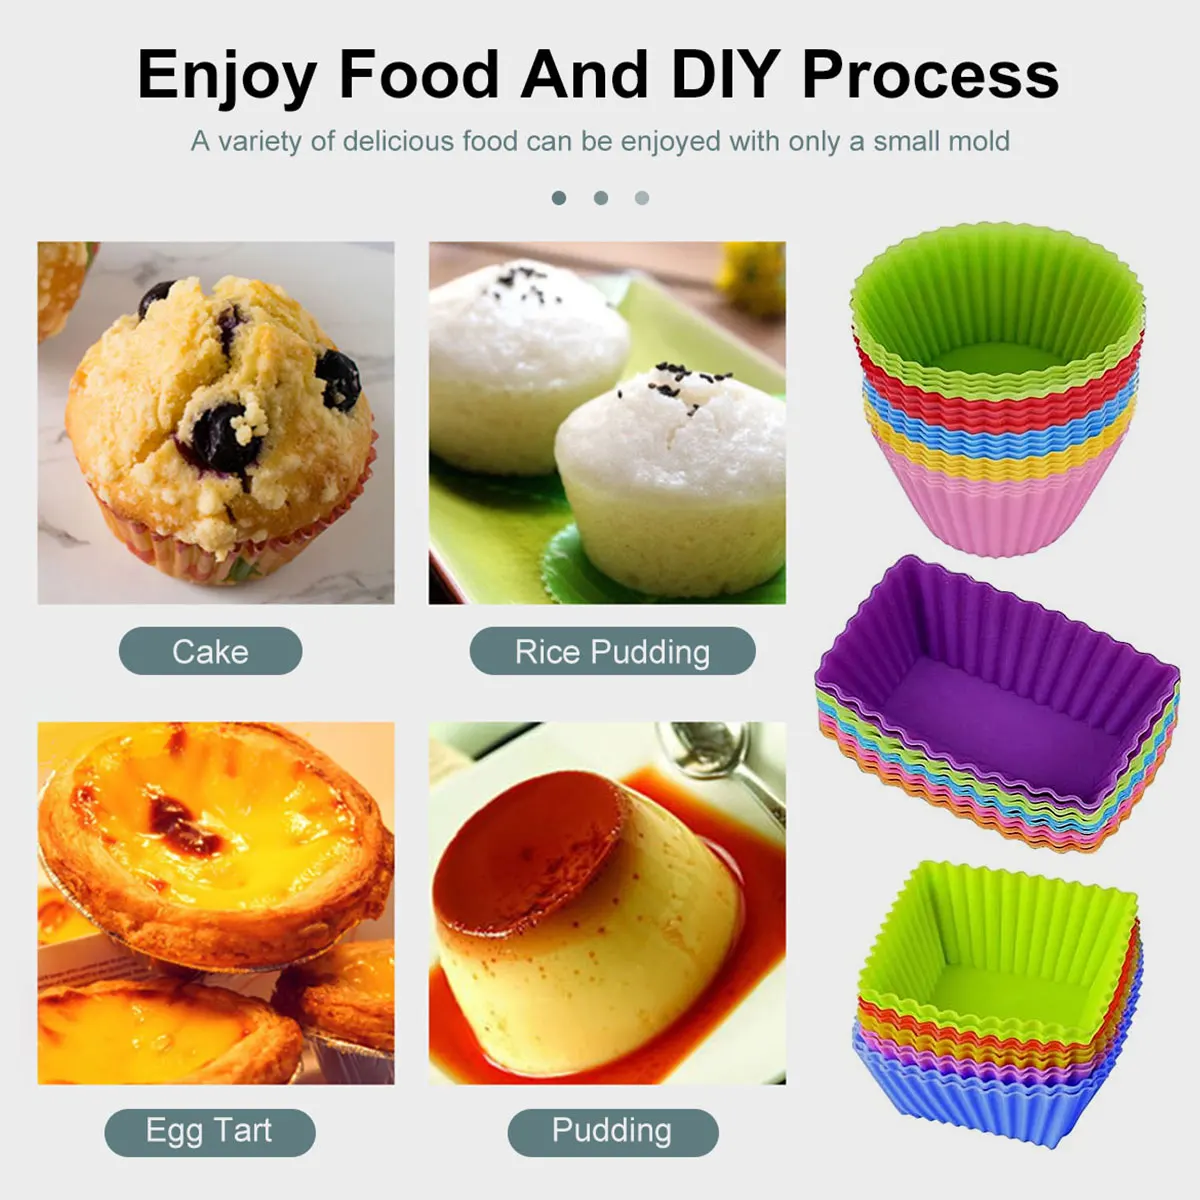 https://ae01.alicdn.com/kf/Sb5b90edd650e49078a3f0f78ec641414B/78PCS-Silicone-Lunch-Box-Dividers-Bento-Cupcake-Liners-Muffin-Cups-Baking-Cake-Molds-Fruit-Fork-Set.jpg